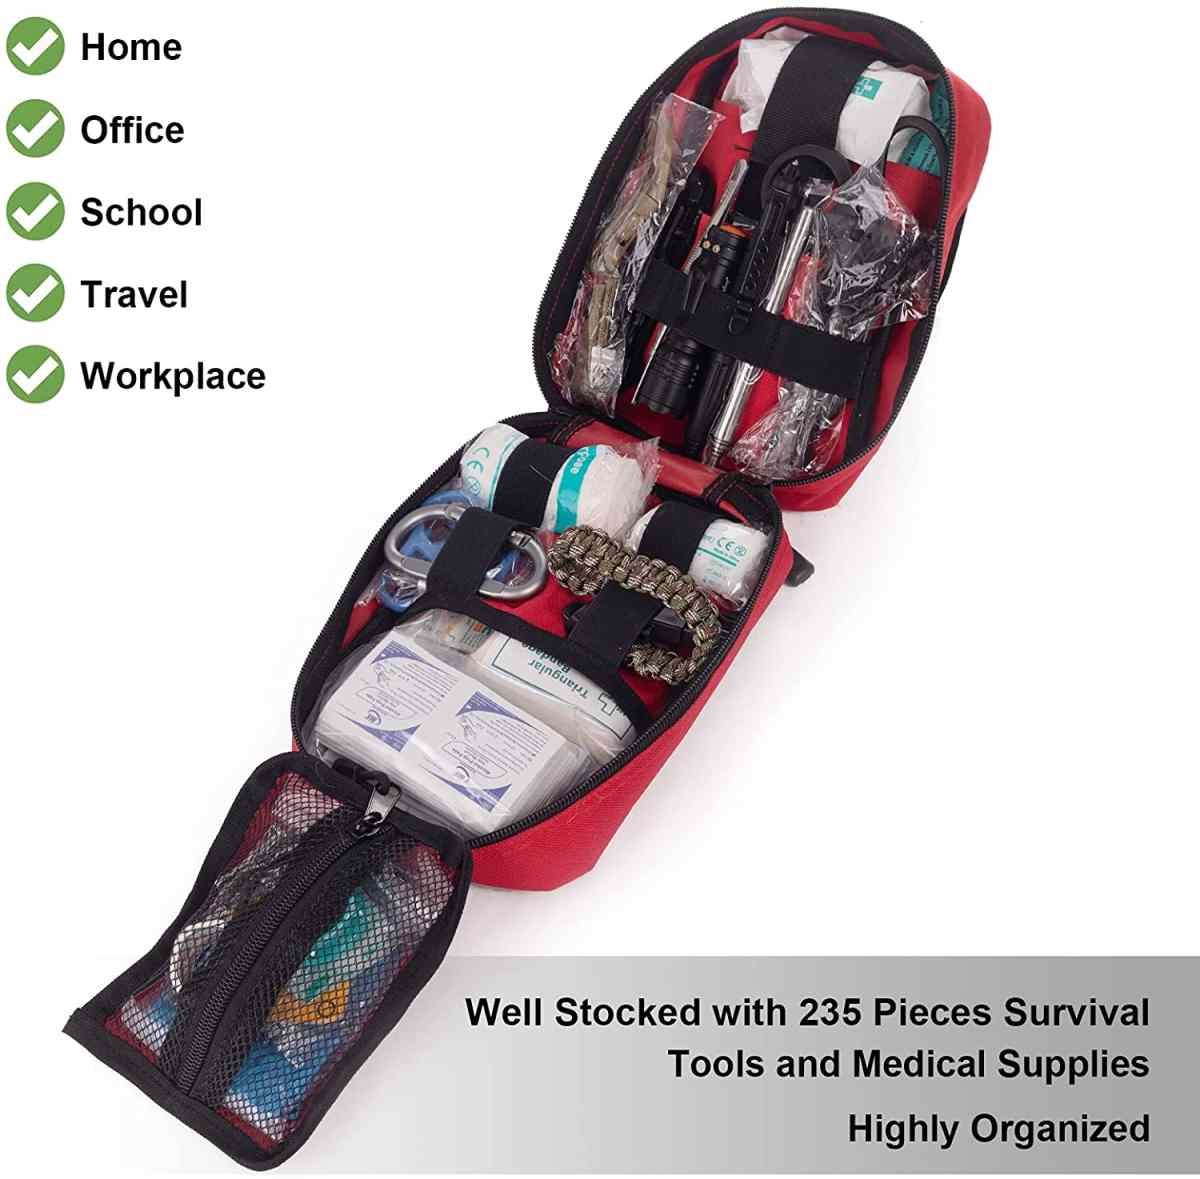 Red Multi-Purpose First Aid Survival Gear for Camping - 1 